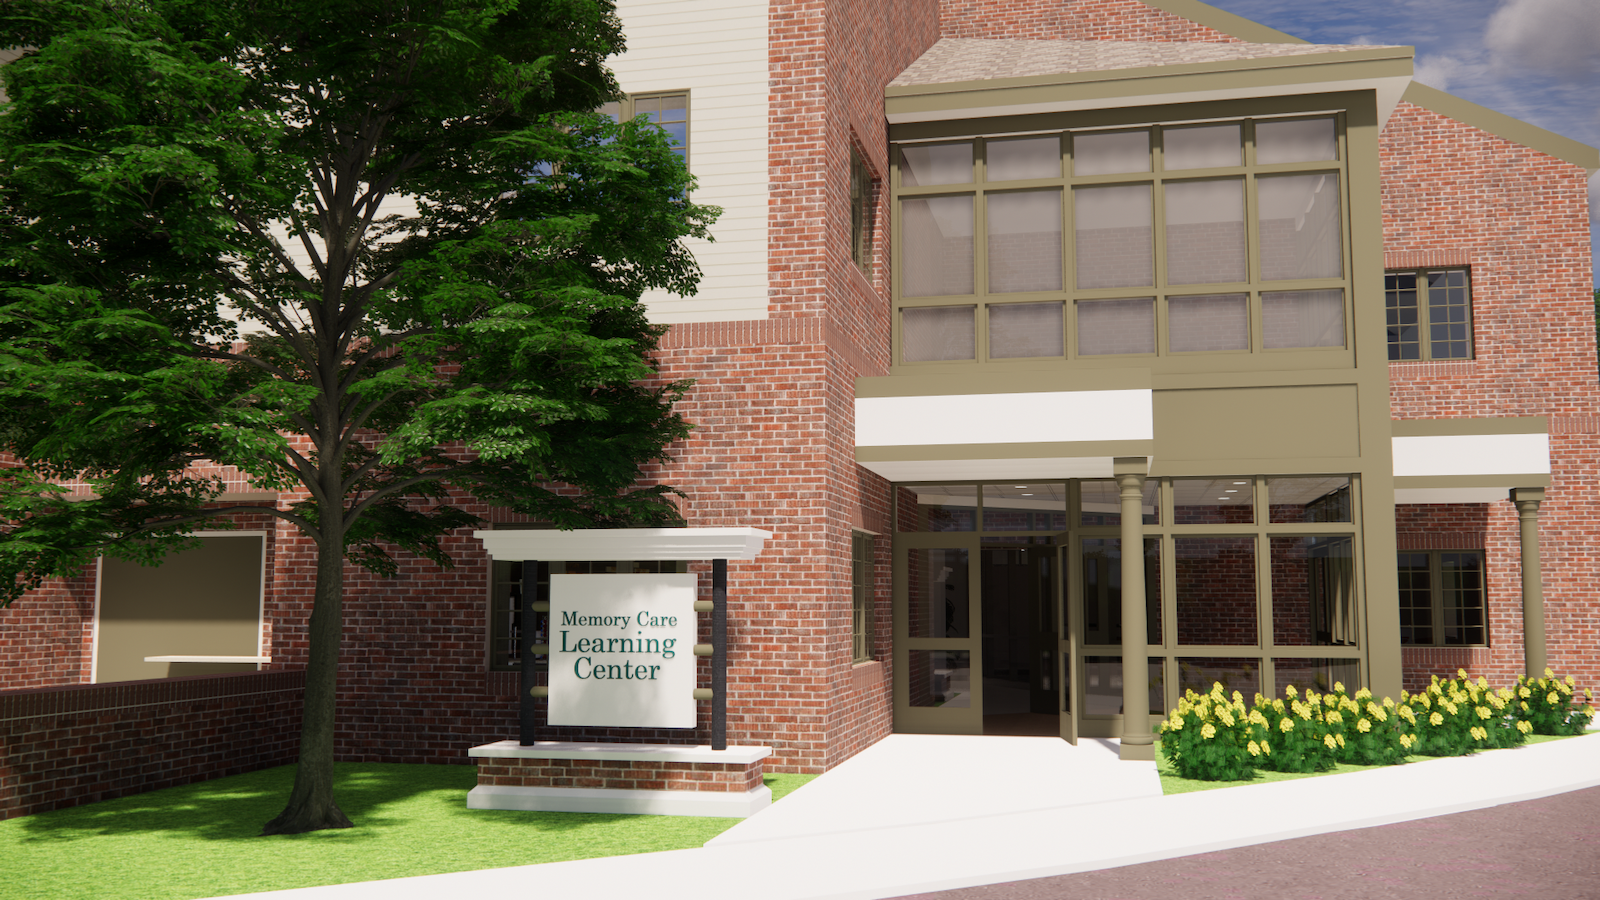 An artist's rendering of the Memory Care Learning Center entrance at the Heritage Community.